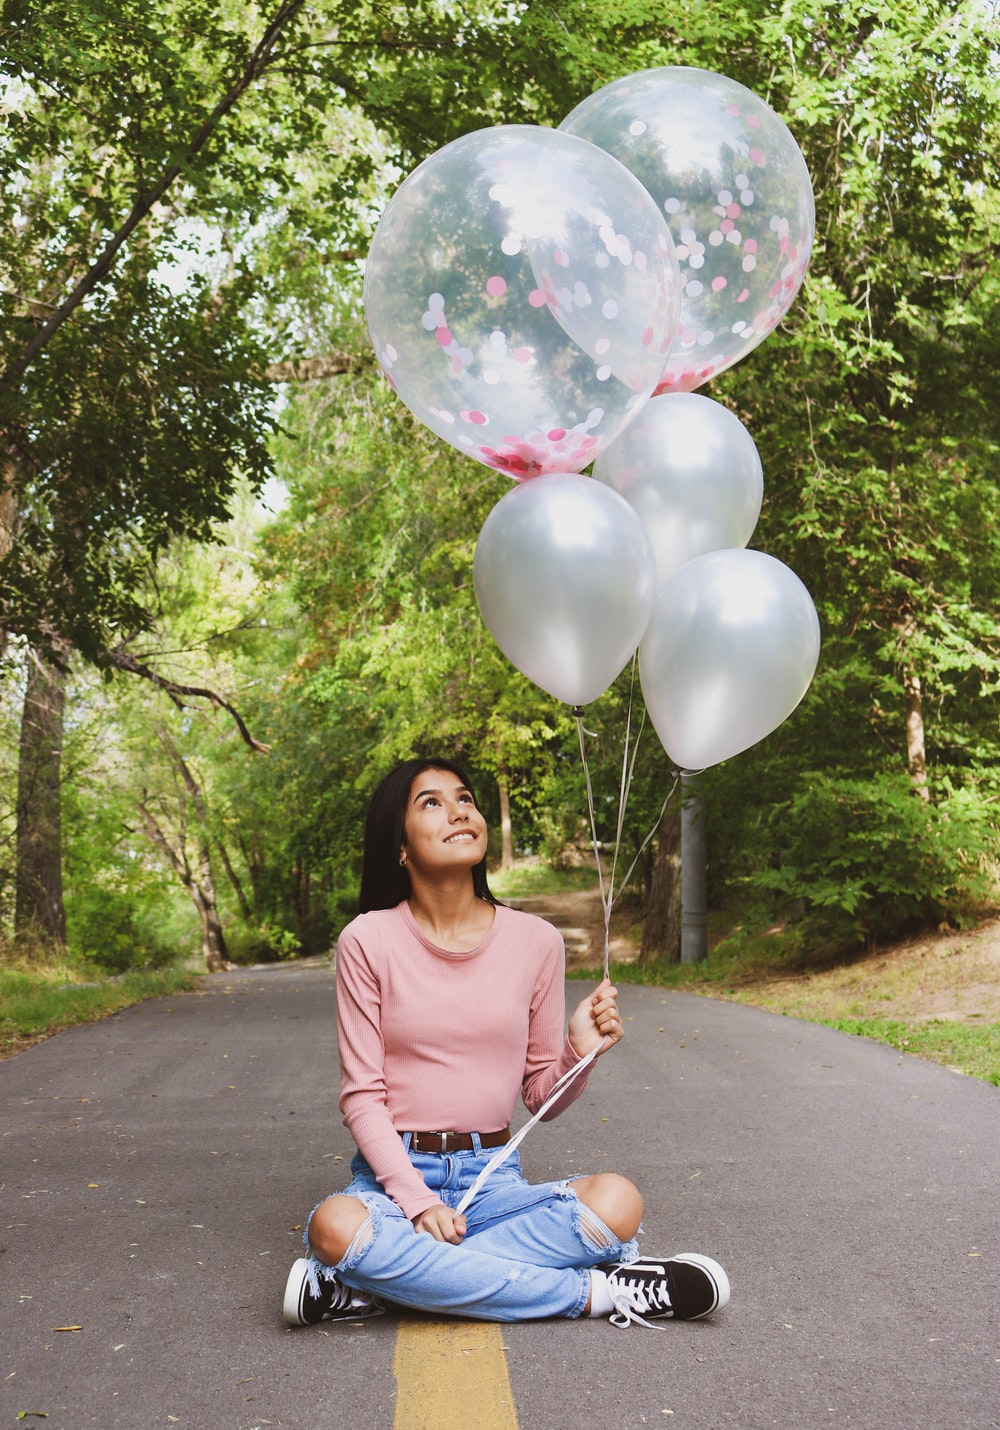 Balloon Girl Picture. Download Free Image